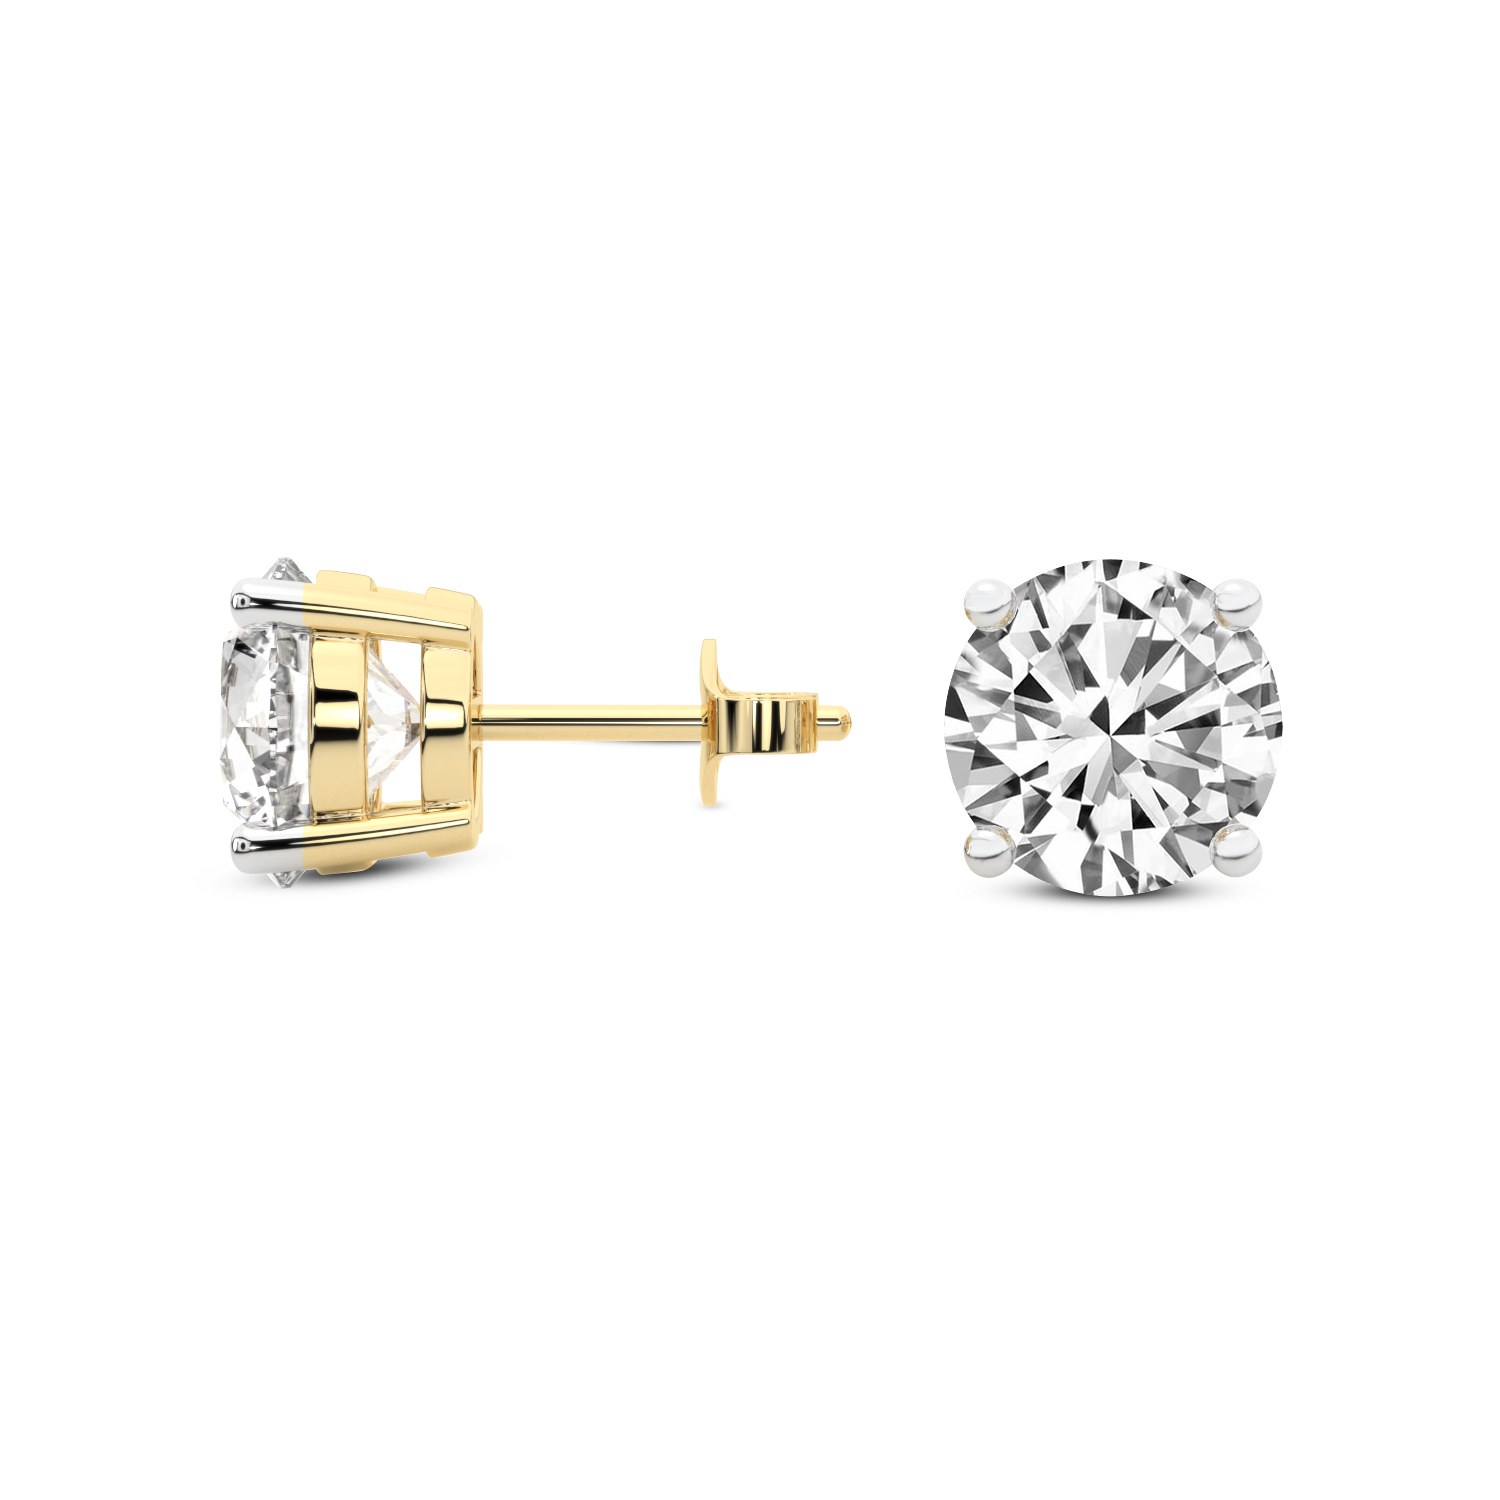 4 Prong Round Lab Diamond Stud Earrings yellow gold earring, small left view